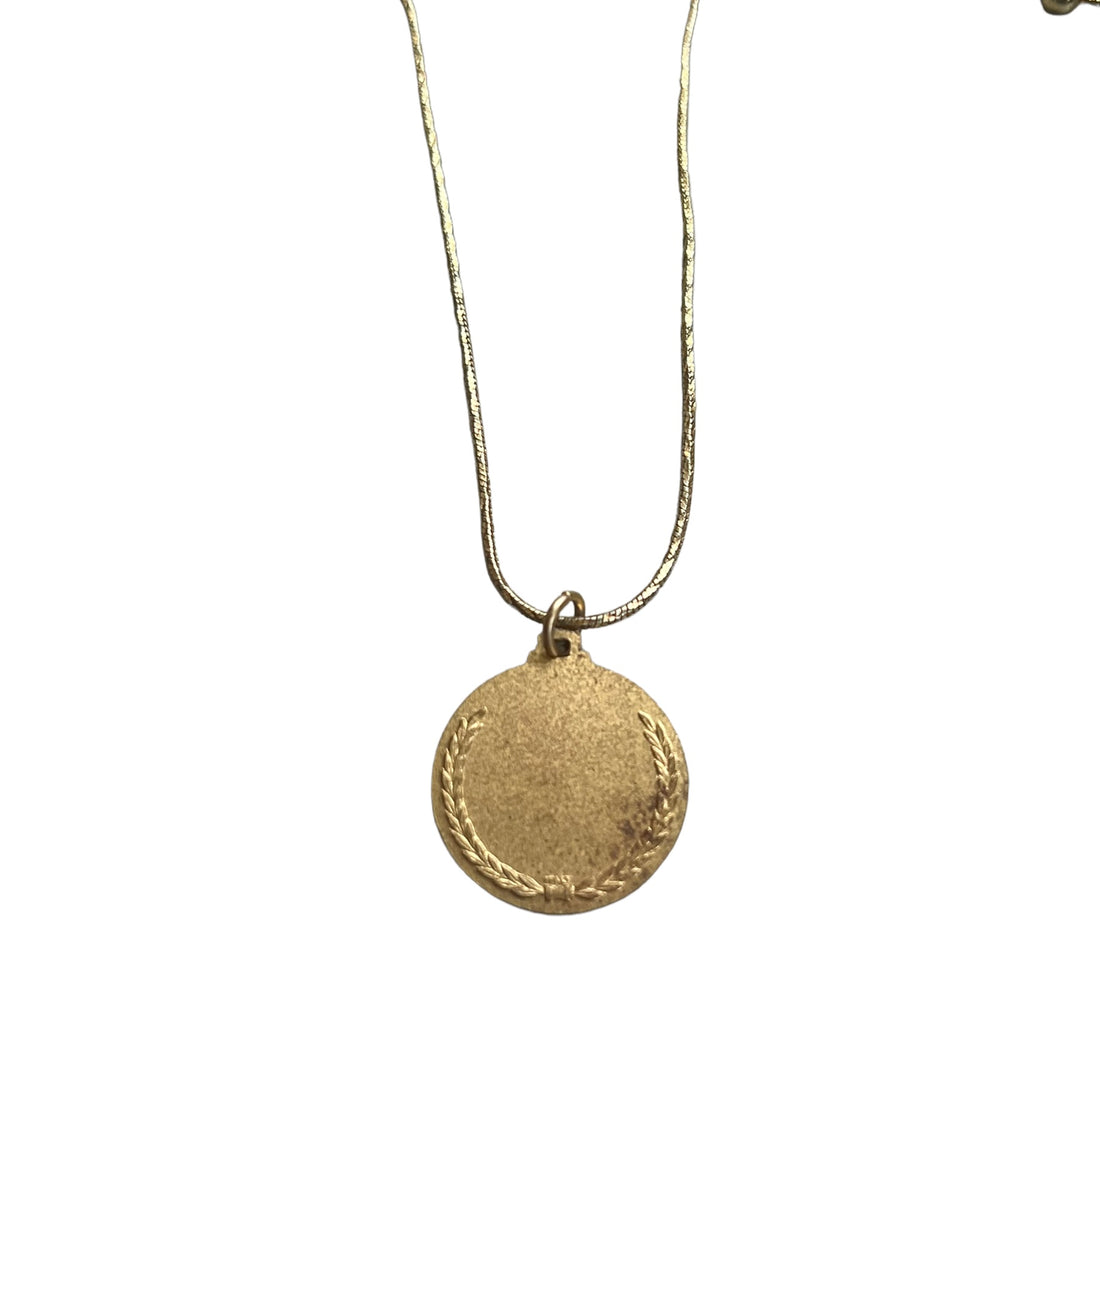 Antique coin pendant with leaf detailing by hipV Modern Vintage Jewelry.